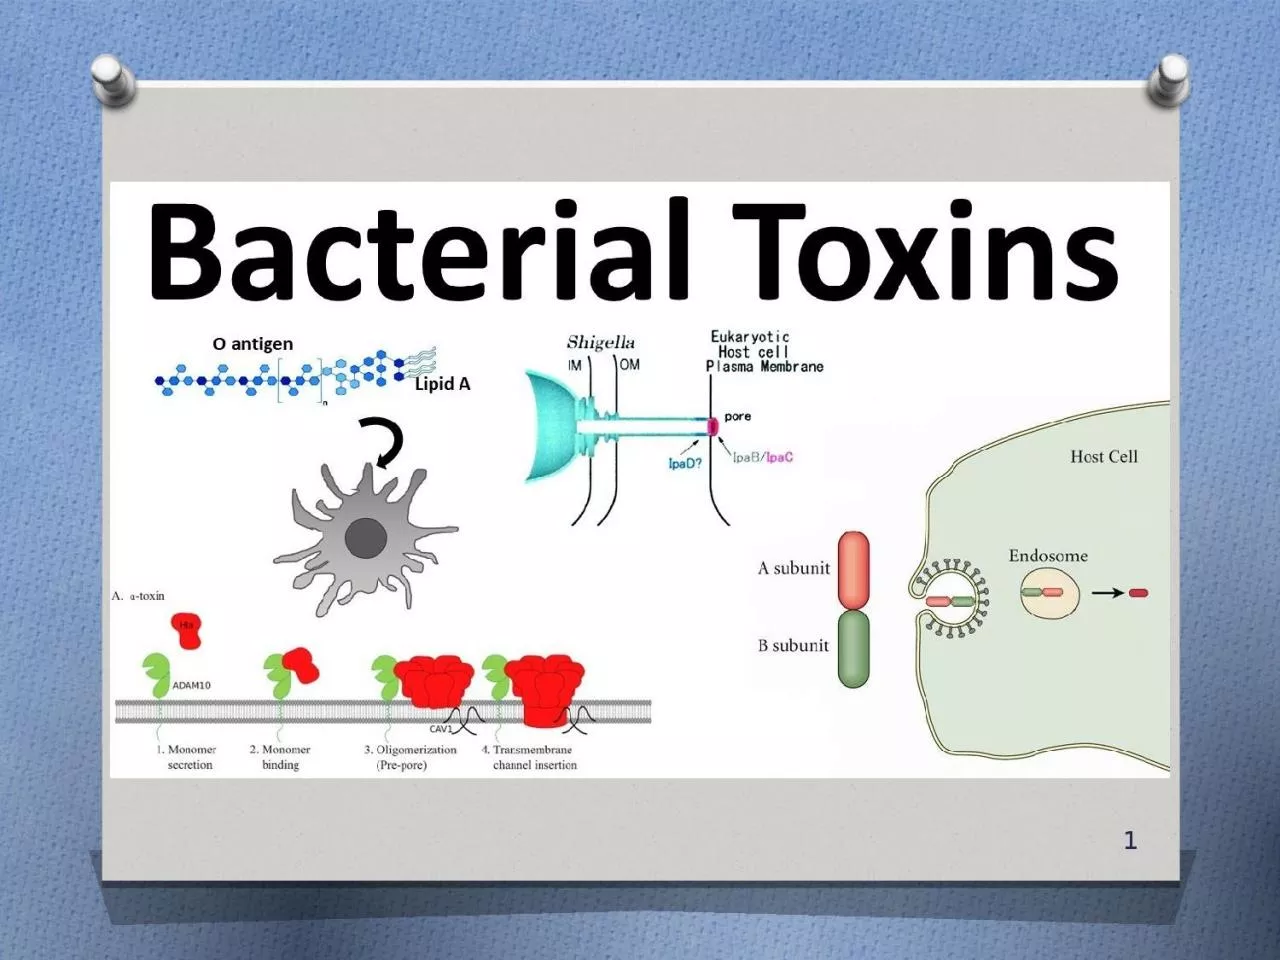 1 A toxin is a poisonous substance produced within living cells or organisms. toxins can